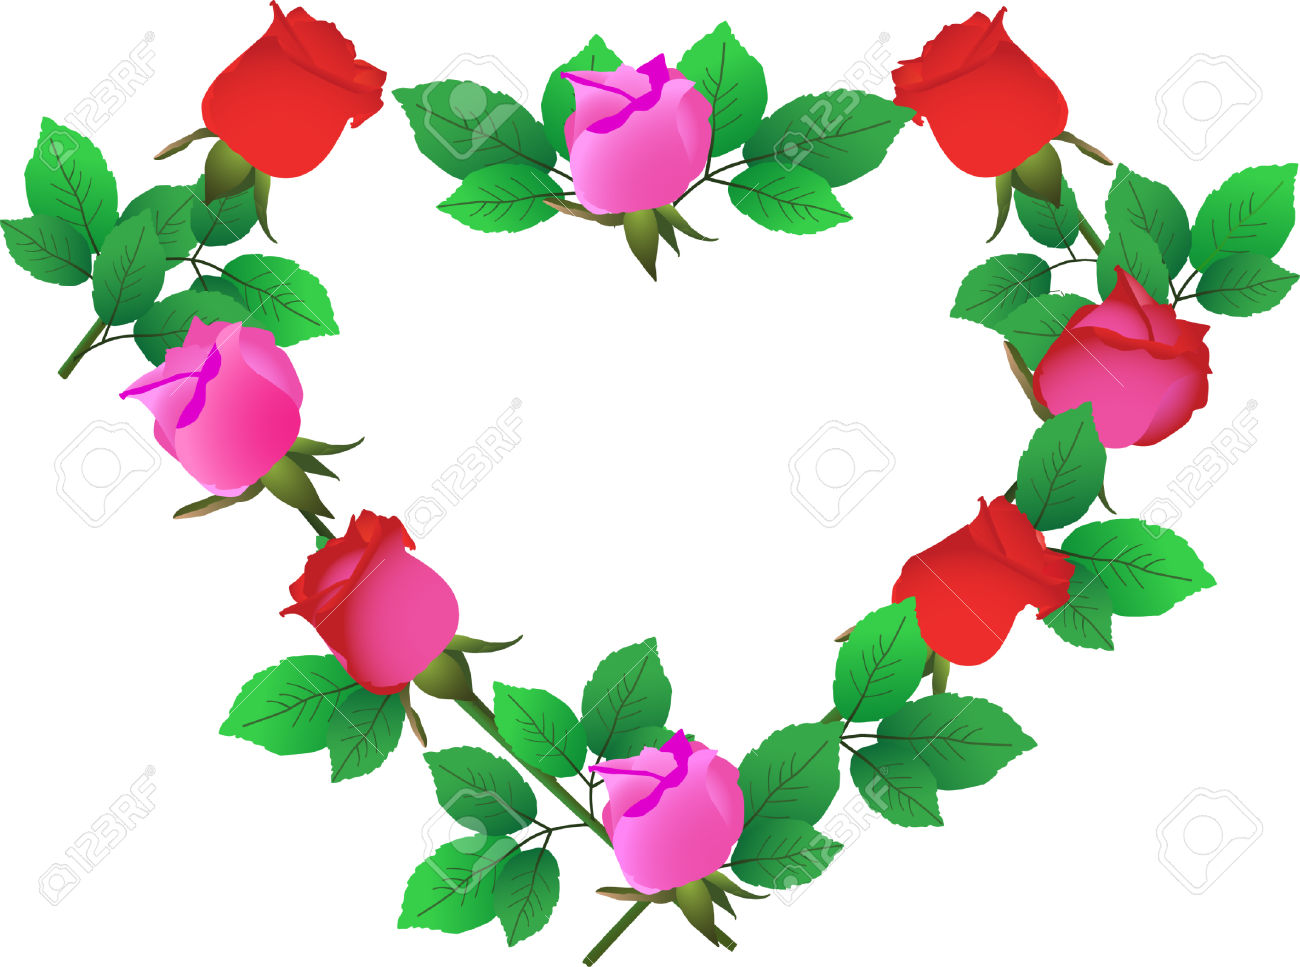 Varigated rose clipart 20 free Cliparts | Download images on Clipground ...